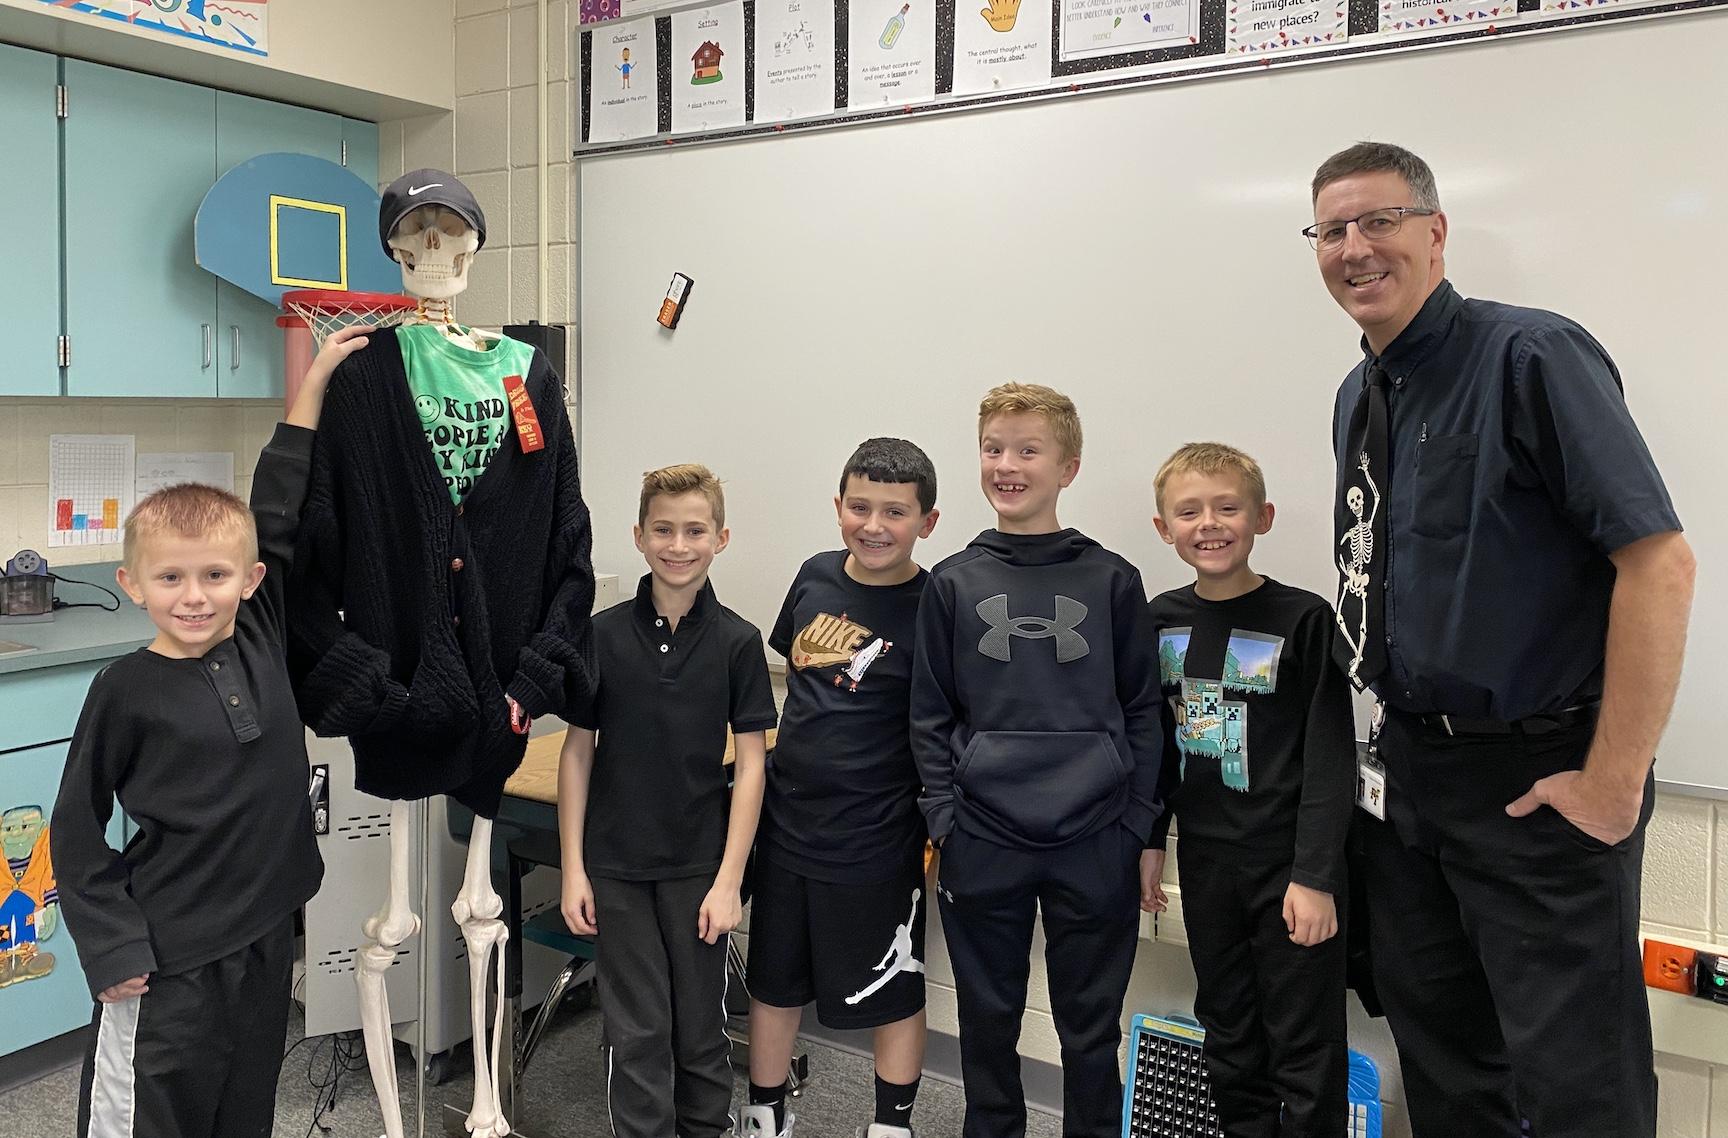 Mr. Bujdos and his students “black out drugs” at Trafford Elementary